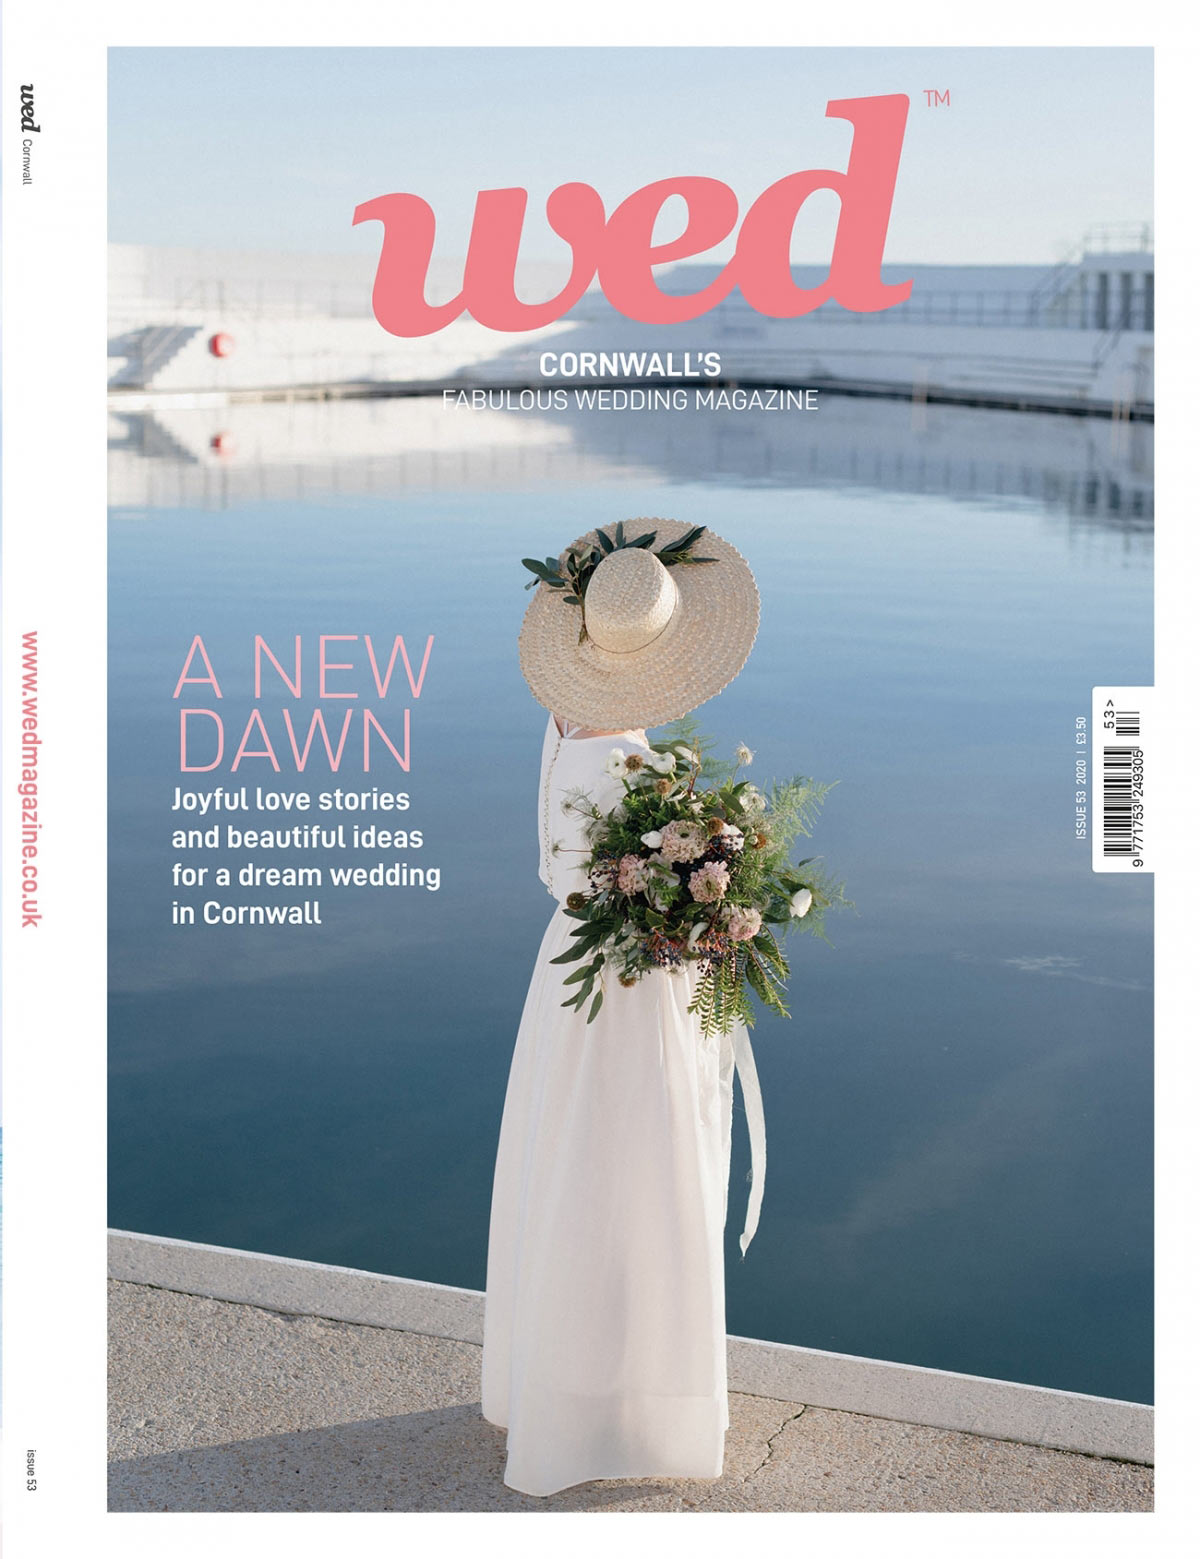 Order the new Cornwall issue of Wed Magazine!